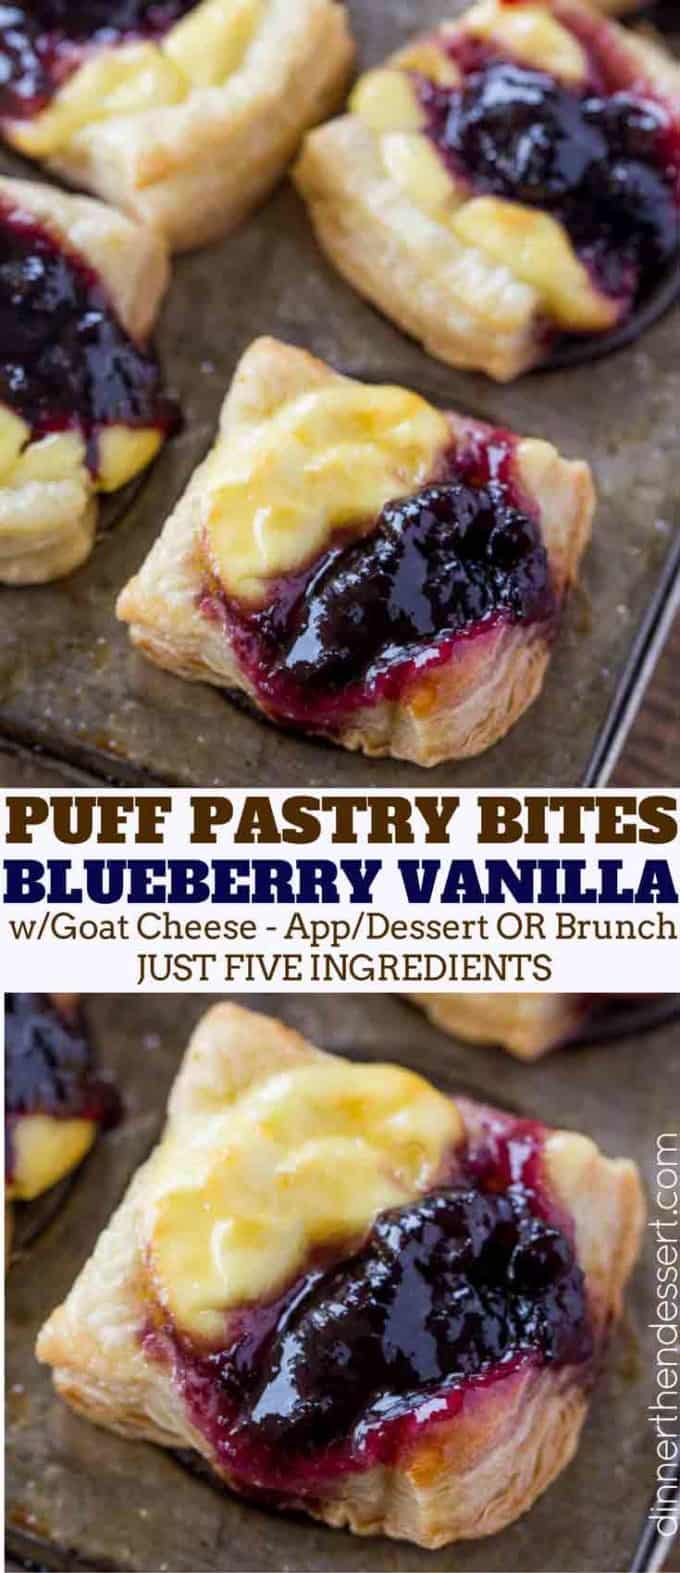 Blueberry Vanilla Goat Cheese Pastry Bites with just five ingredients are the easiest appetizers you'll ever serve your guests. Perfect for the holidays!